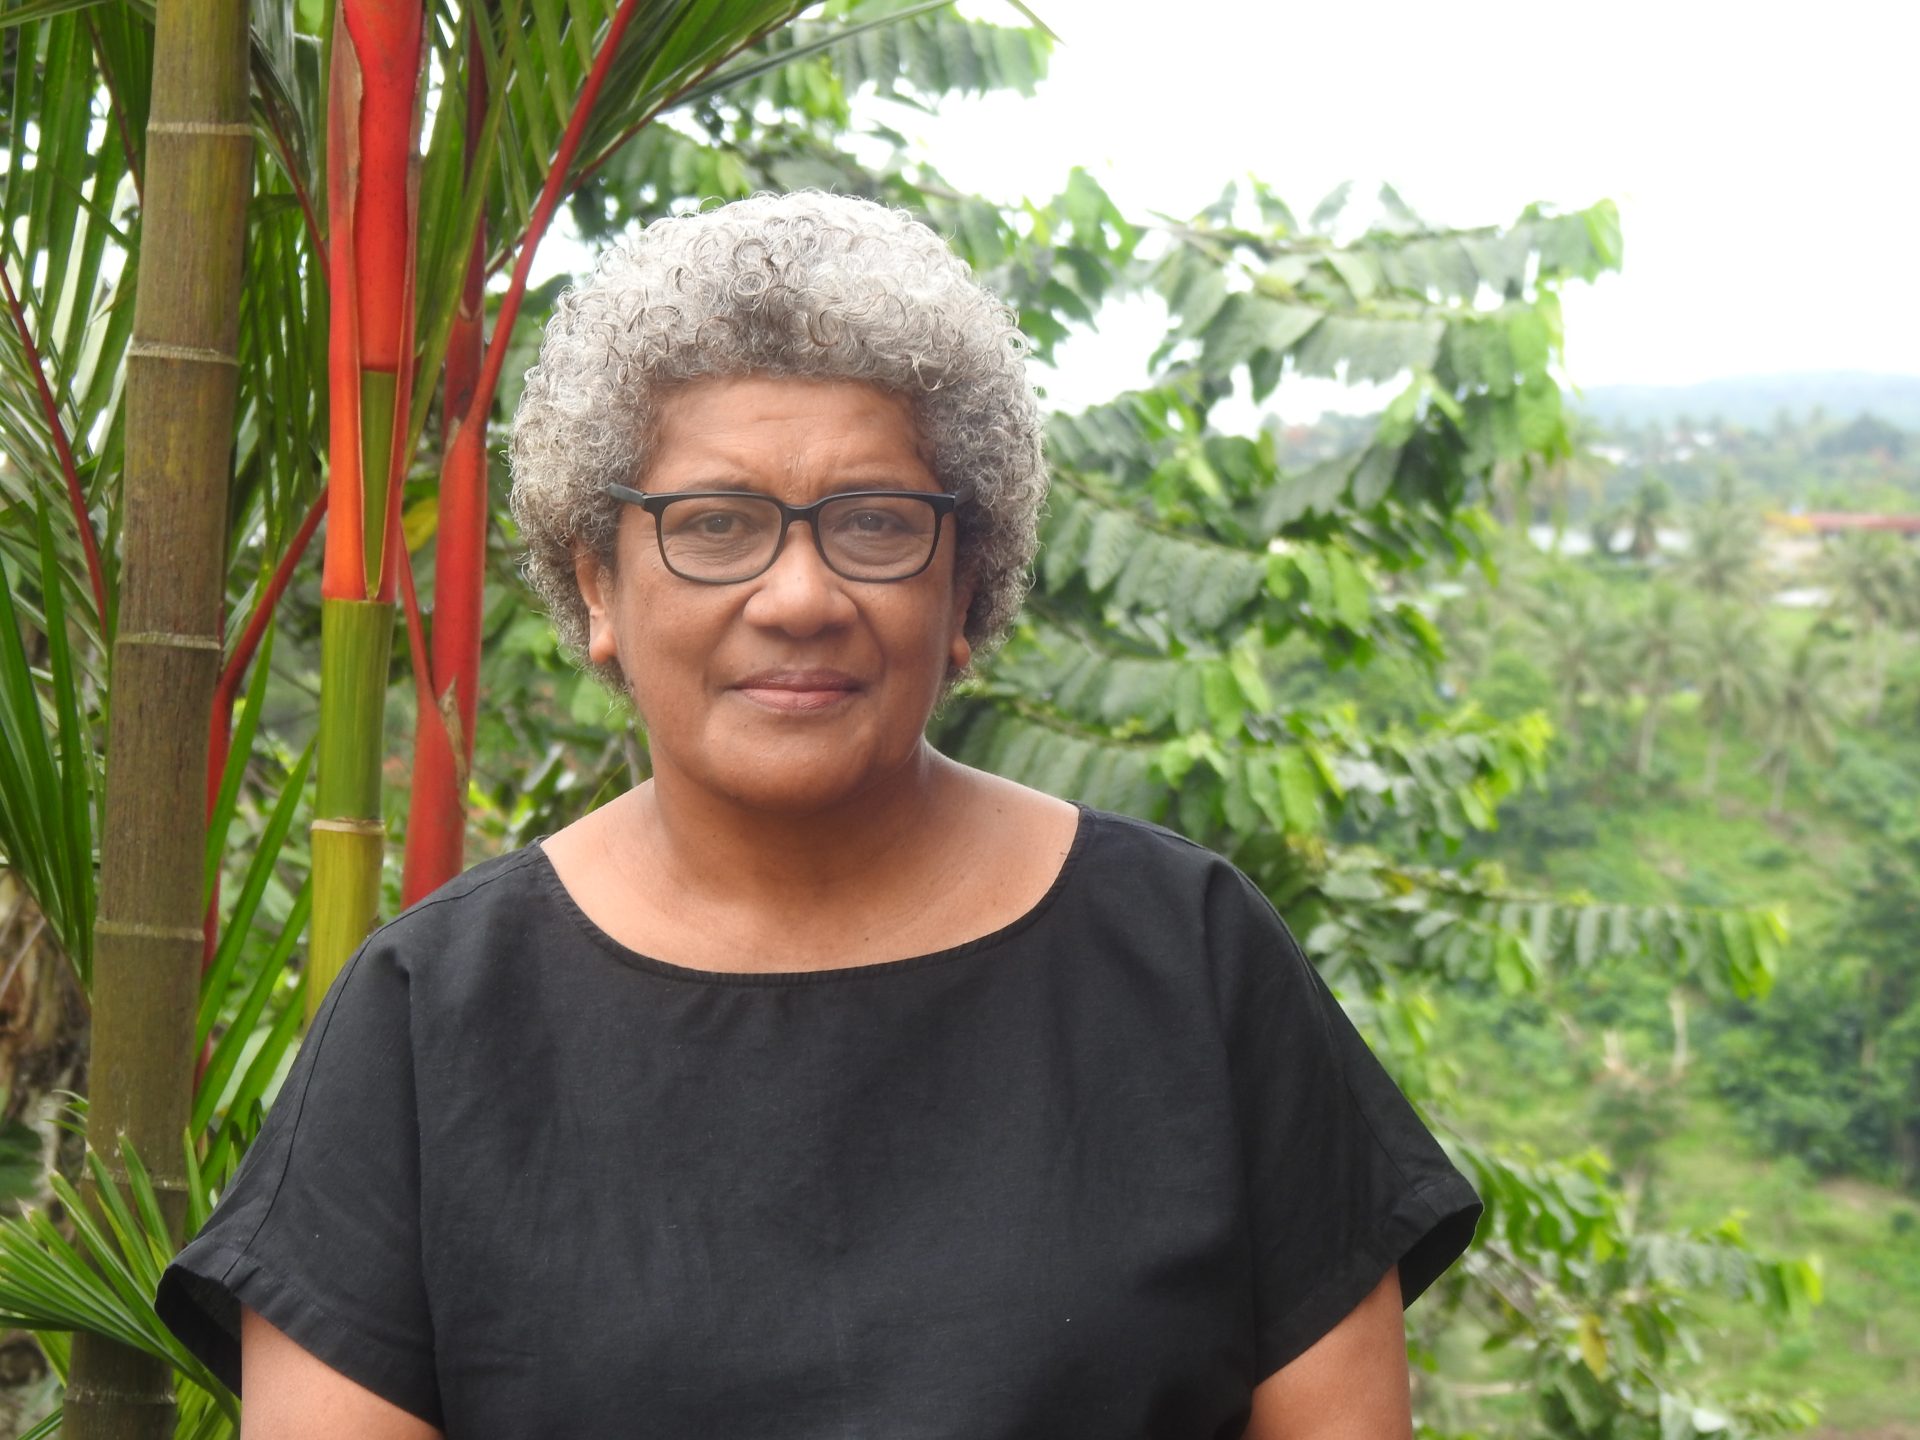 Dr. Milika Sobey, representative of the iTaukei people from Fiji. Stands in front of luxurious green plants. She is a keynote speaker in the Opening Ceremony for World Water Week 2023.